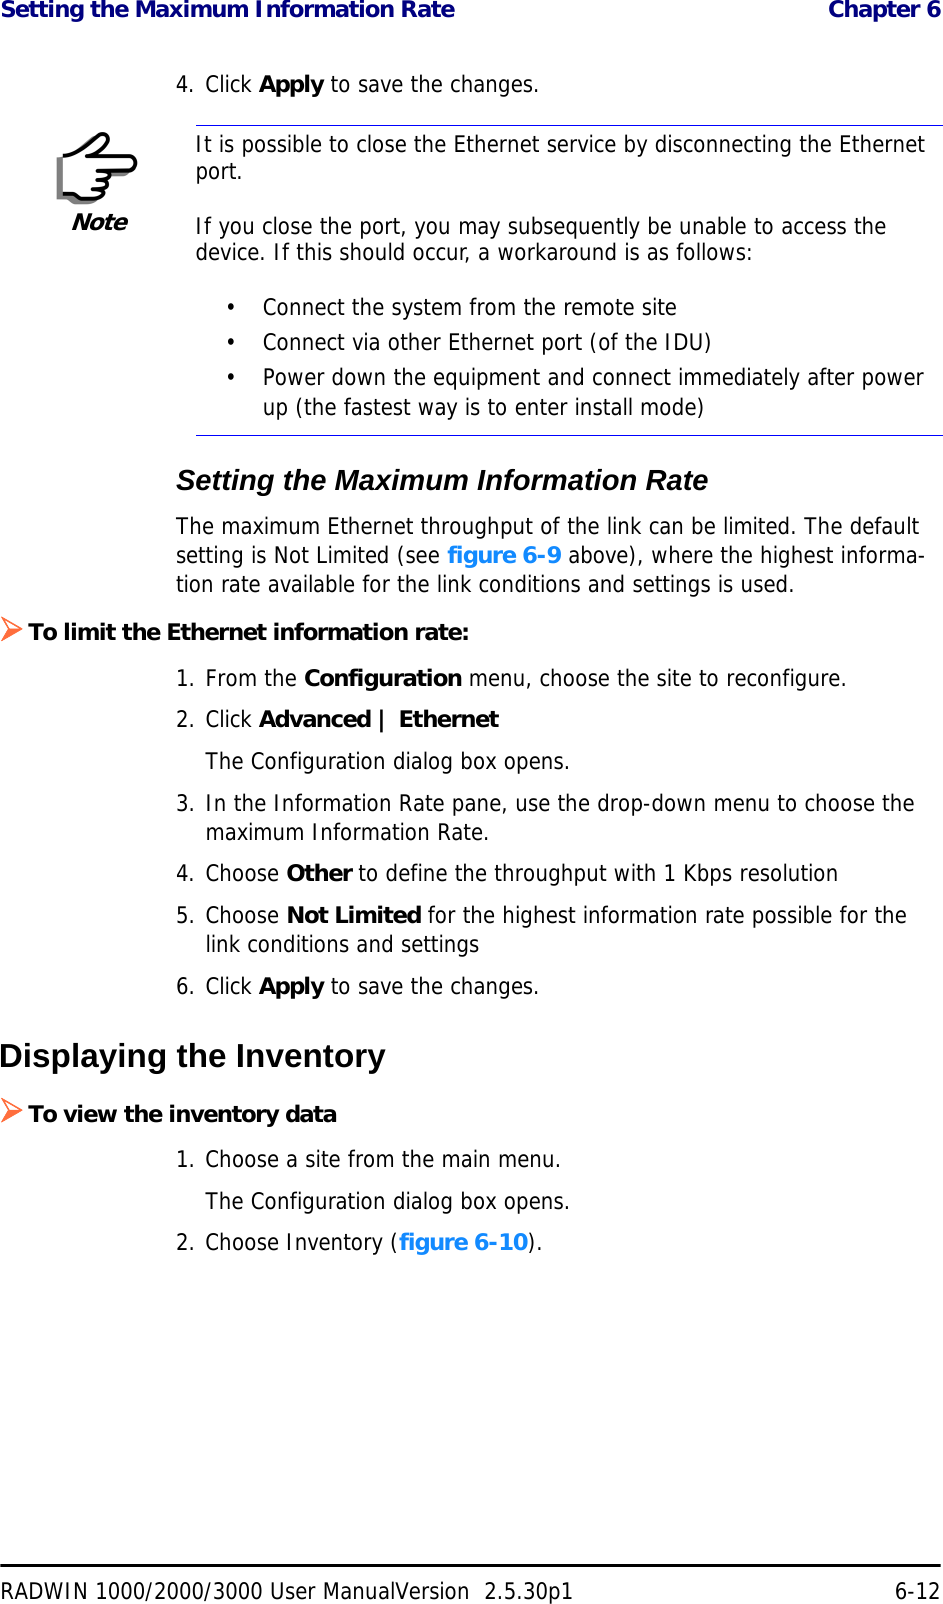 Setting the Maximum Information Rate  Chapter 6RADWIN 1000/2000/3000 User ManualVersion  2.5.30p1 6-124. Click Apply to save the changes.Setting the Maximum Information RateThe maximum Ethernet throughput of the link can be limited. The default setting is Not Limited (see figure 6-9 above), where the highest informa-tion rate available for the link conditions and settings is used.¾To limit the Ethernet information rate:1. From the Configuration menu, choose the site to reconfigure.2. Click Advanced | EthernetThe Configuration dialog box opens.3. In the Information Rate pane, use the drop-down menu to choose the maximum Information Rate.4. Choose Other to define the throughput with 1 Kbps resolution5. Choose Not Limited for the highest information rate possible for the link conditions and settings6. Click Apply to save the changes.Displaying the Inventory¾To view the inventory data1. Choose a site from the main menu.The Configuration dialog box opens.2. Choose Inventory (figure 6-10).NoteIt is possible to close the Ethernet service by disconnecting the Ethernet port.If you close the port, you may subsequently be unable to access the device. If this should occur, a workaround is as follows:• Connect the system from the remote site• Connect via other Ethernet port (of the IDU)• Power down the equipment and connect immediately after power up (the fastest way is to enter install mode)